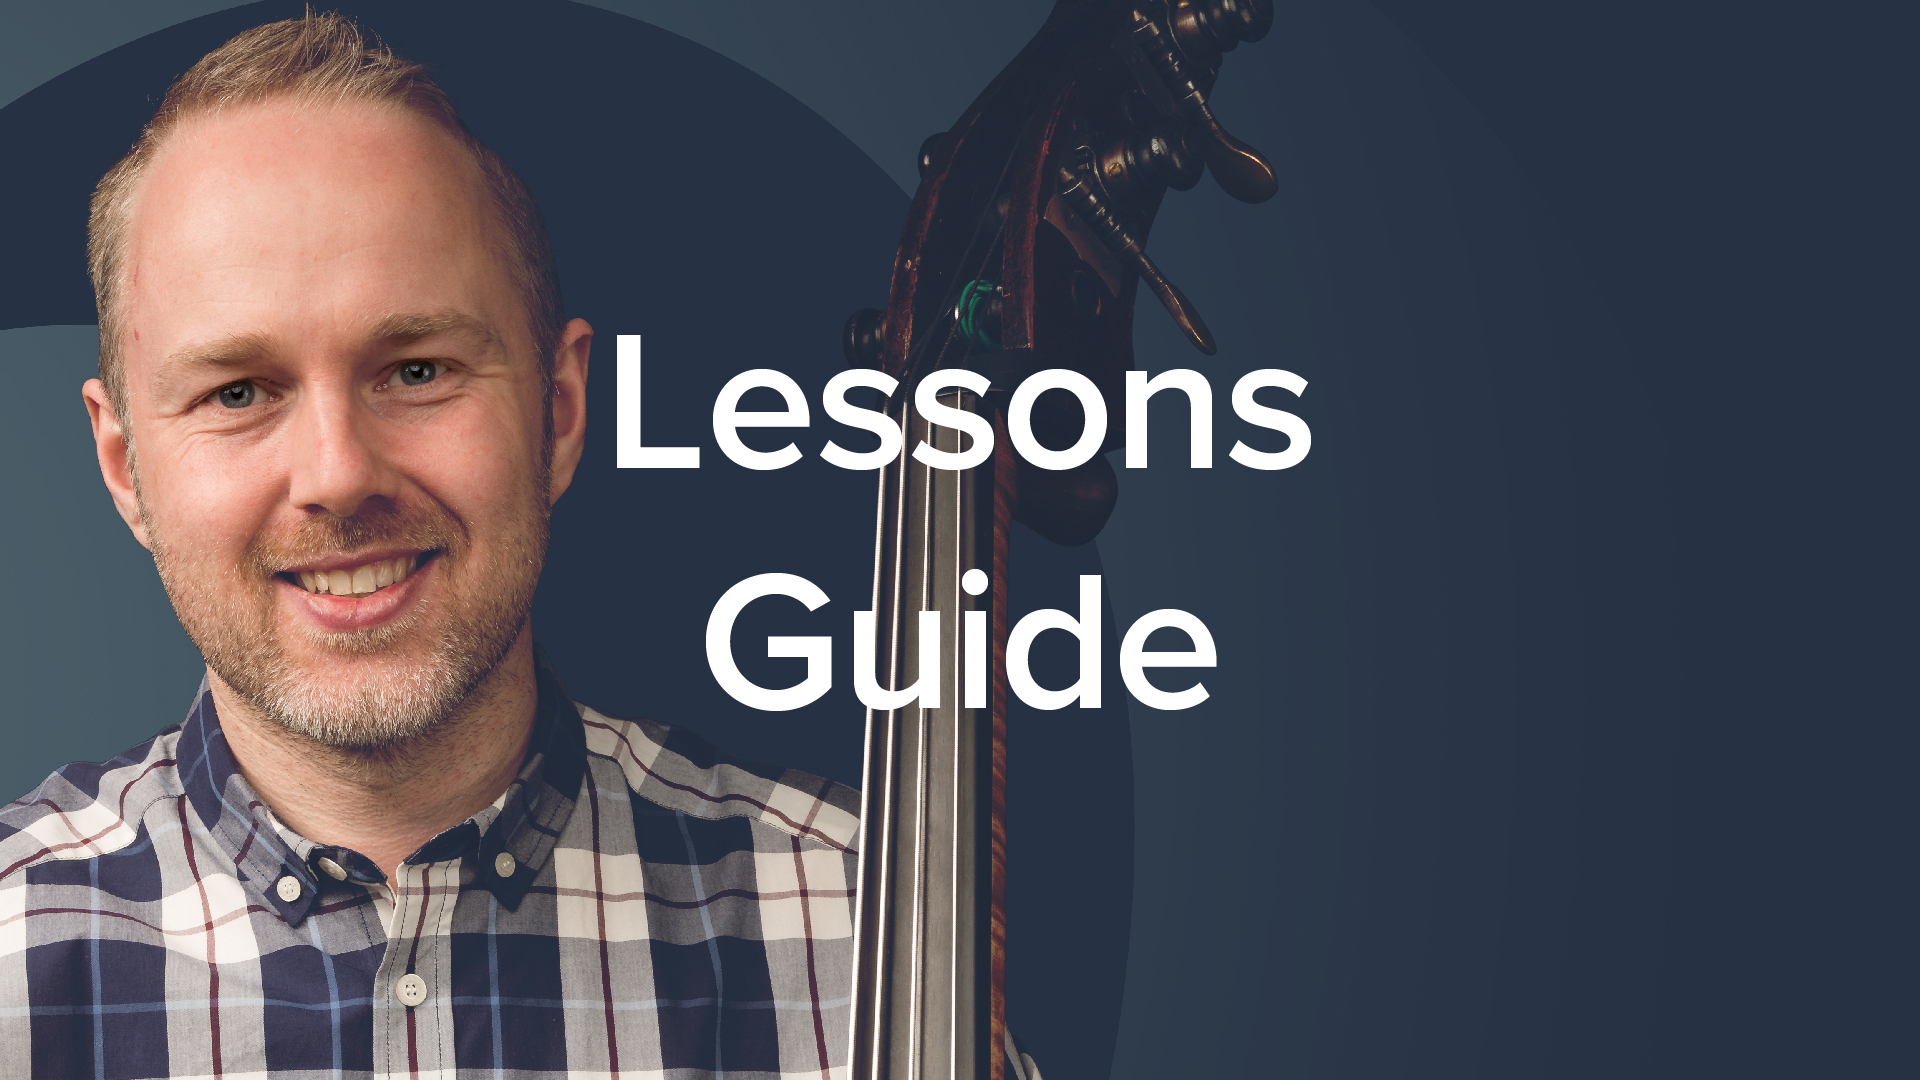 YouTube Lessons Guide by Geoff Chalmers